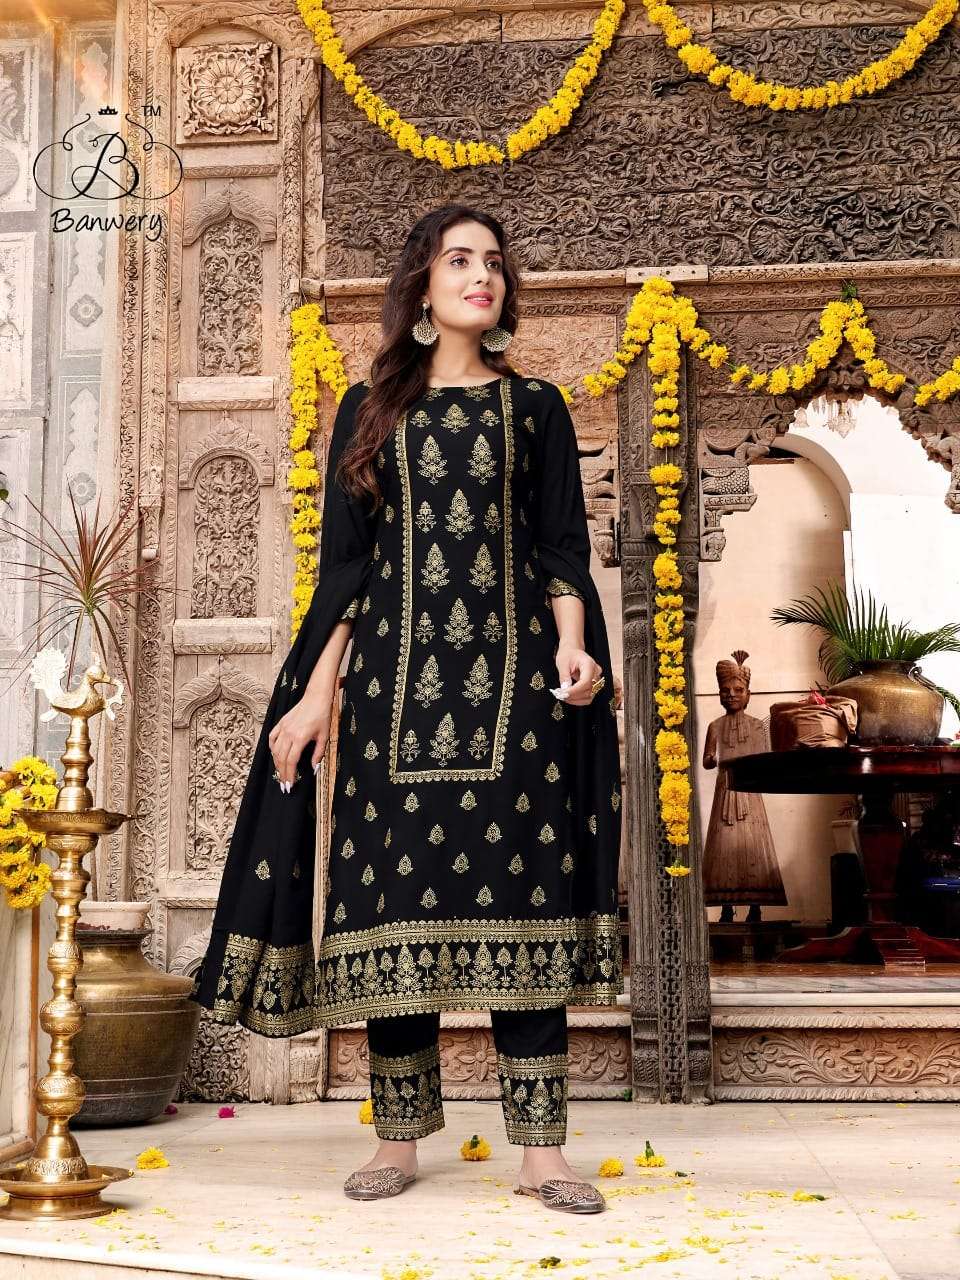 PARISHI BY BANWERY FASHION 1001 TO 1005 SERIES BEAUTIFUL SUITS COLORFUL STYLISH FANCY CASUAL WEAR & ETHNIC WEAR RAYON FOIL PRINT DRESSES AT WHOLESALE PRICE